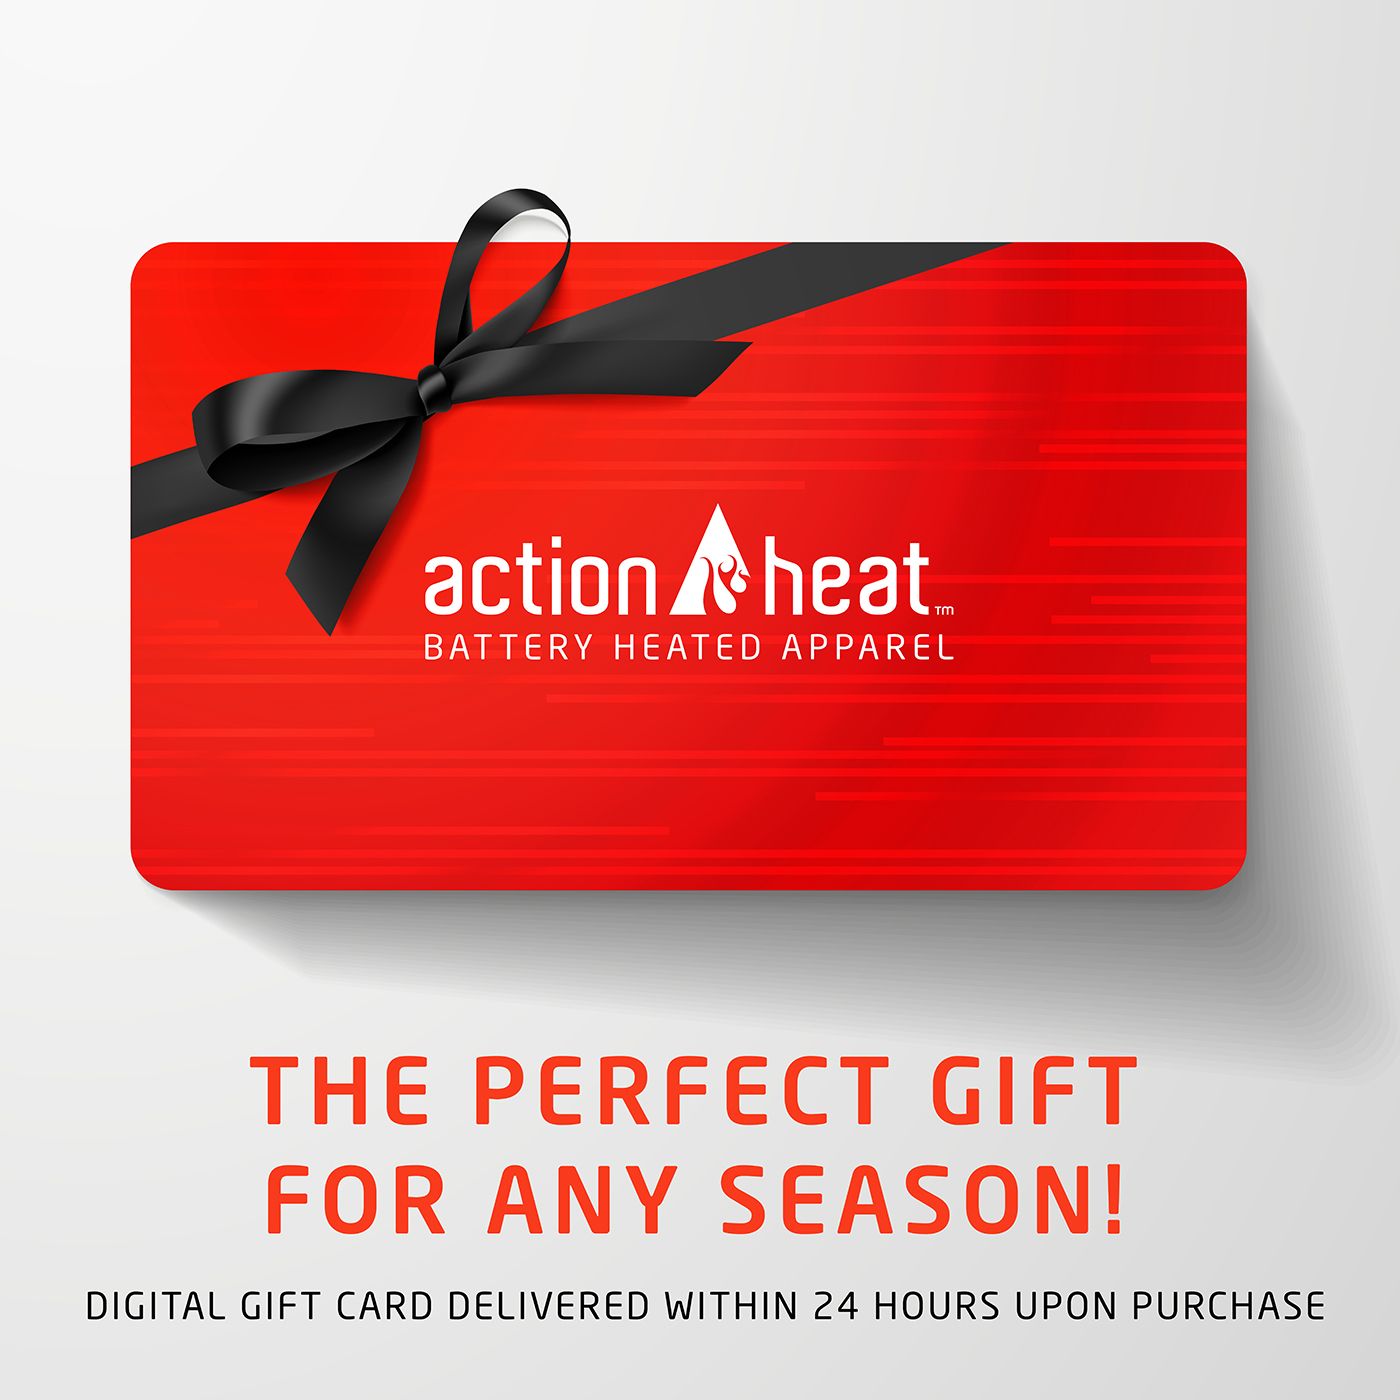 ActionHeat Gift Cards